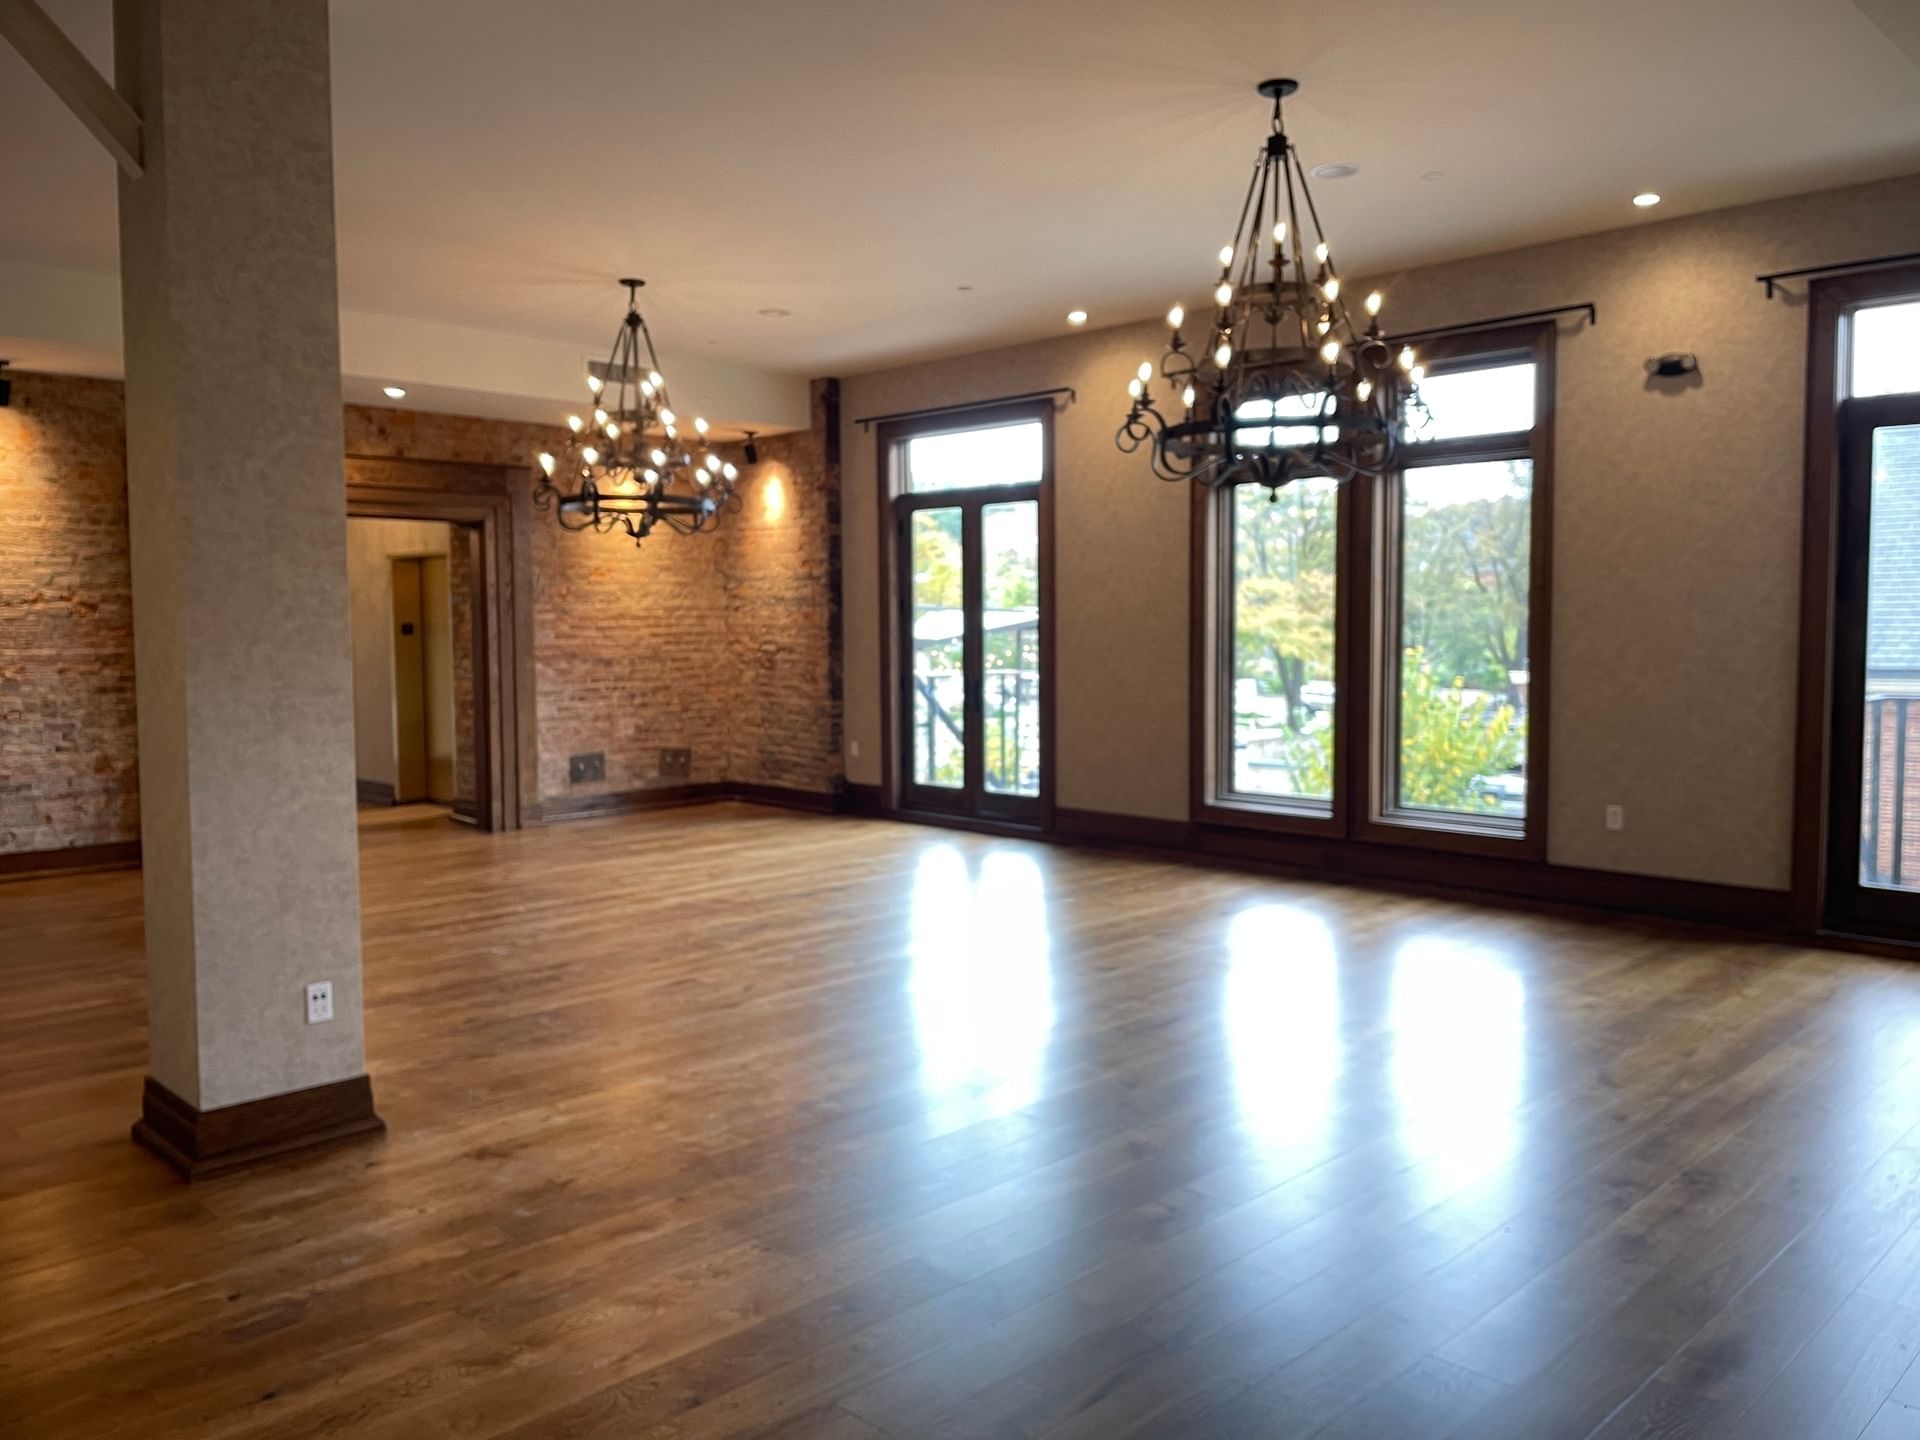 Spacious hall with garden view at Gilman Event Hall Chattanooga